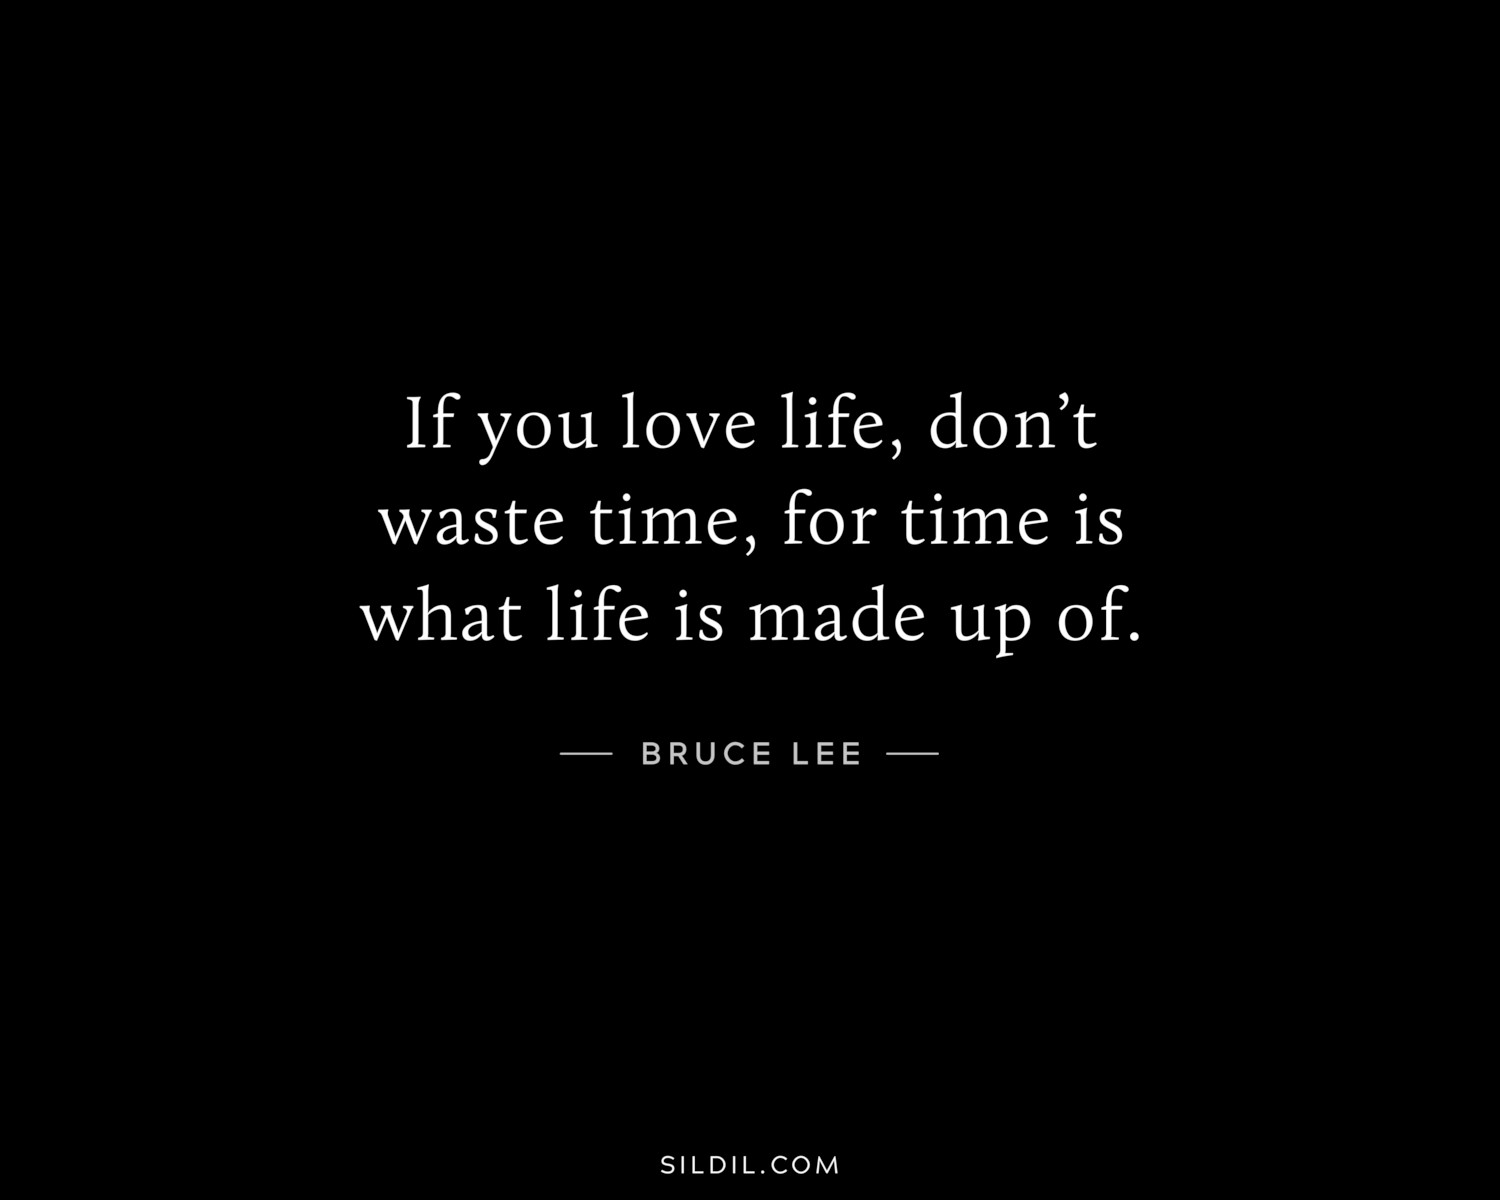 If you love life, don’t waste time, for time is what life is made up of.